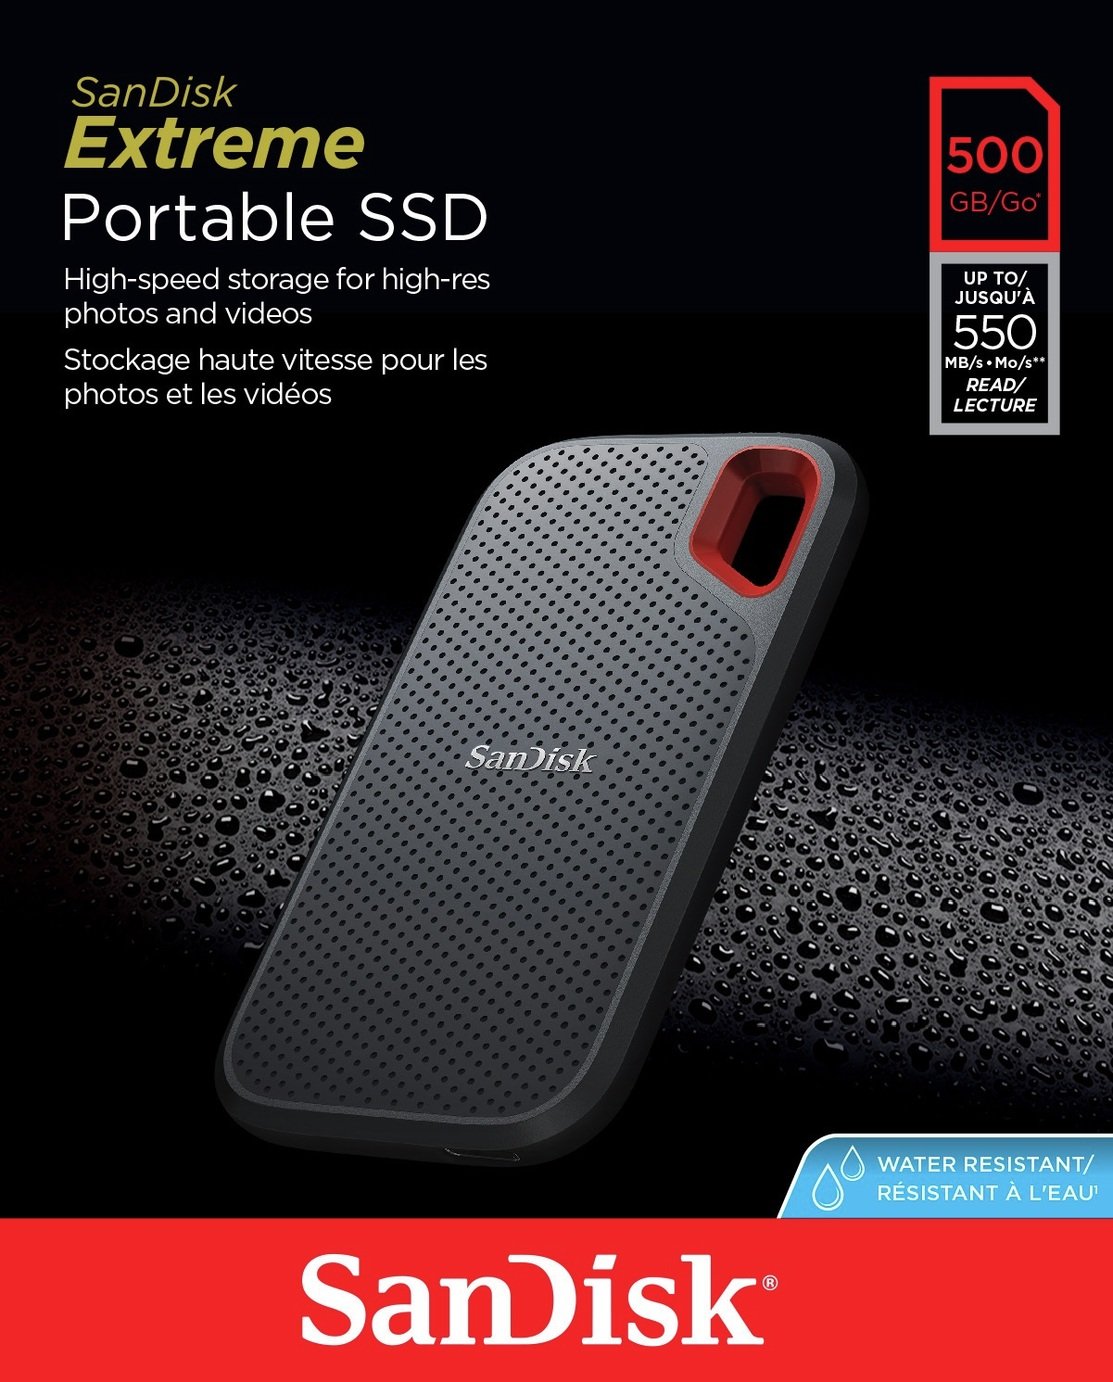 SanDisk Extreme 500GB Portable SSD Hard Drive Review